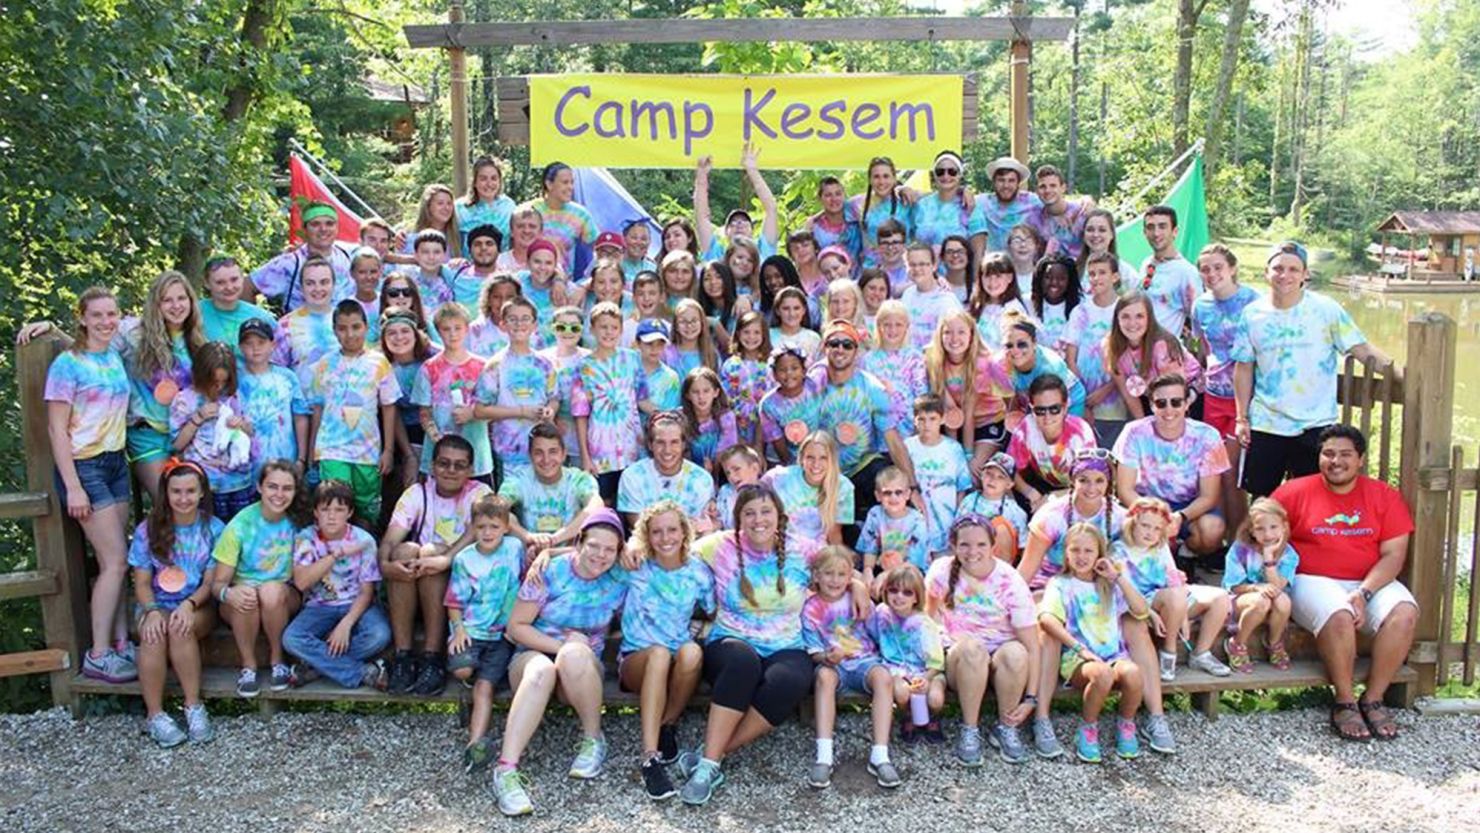 More than 6,000 children this summer whose parents have been touched by cancer will visit Camp Kesem this summer.